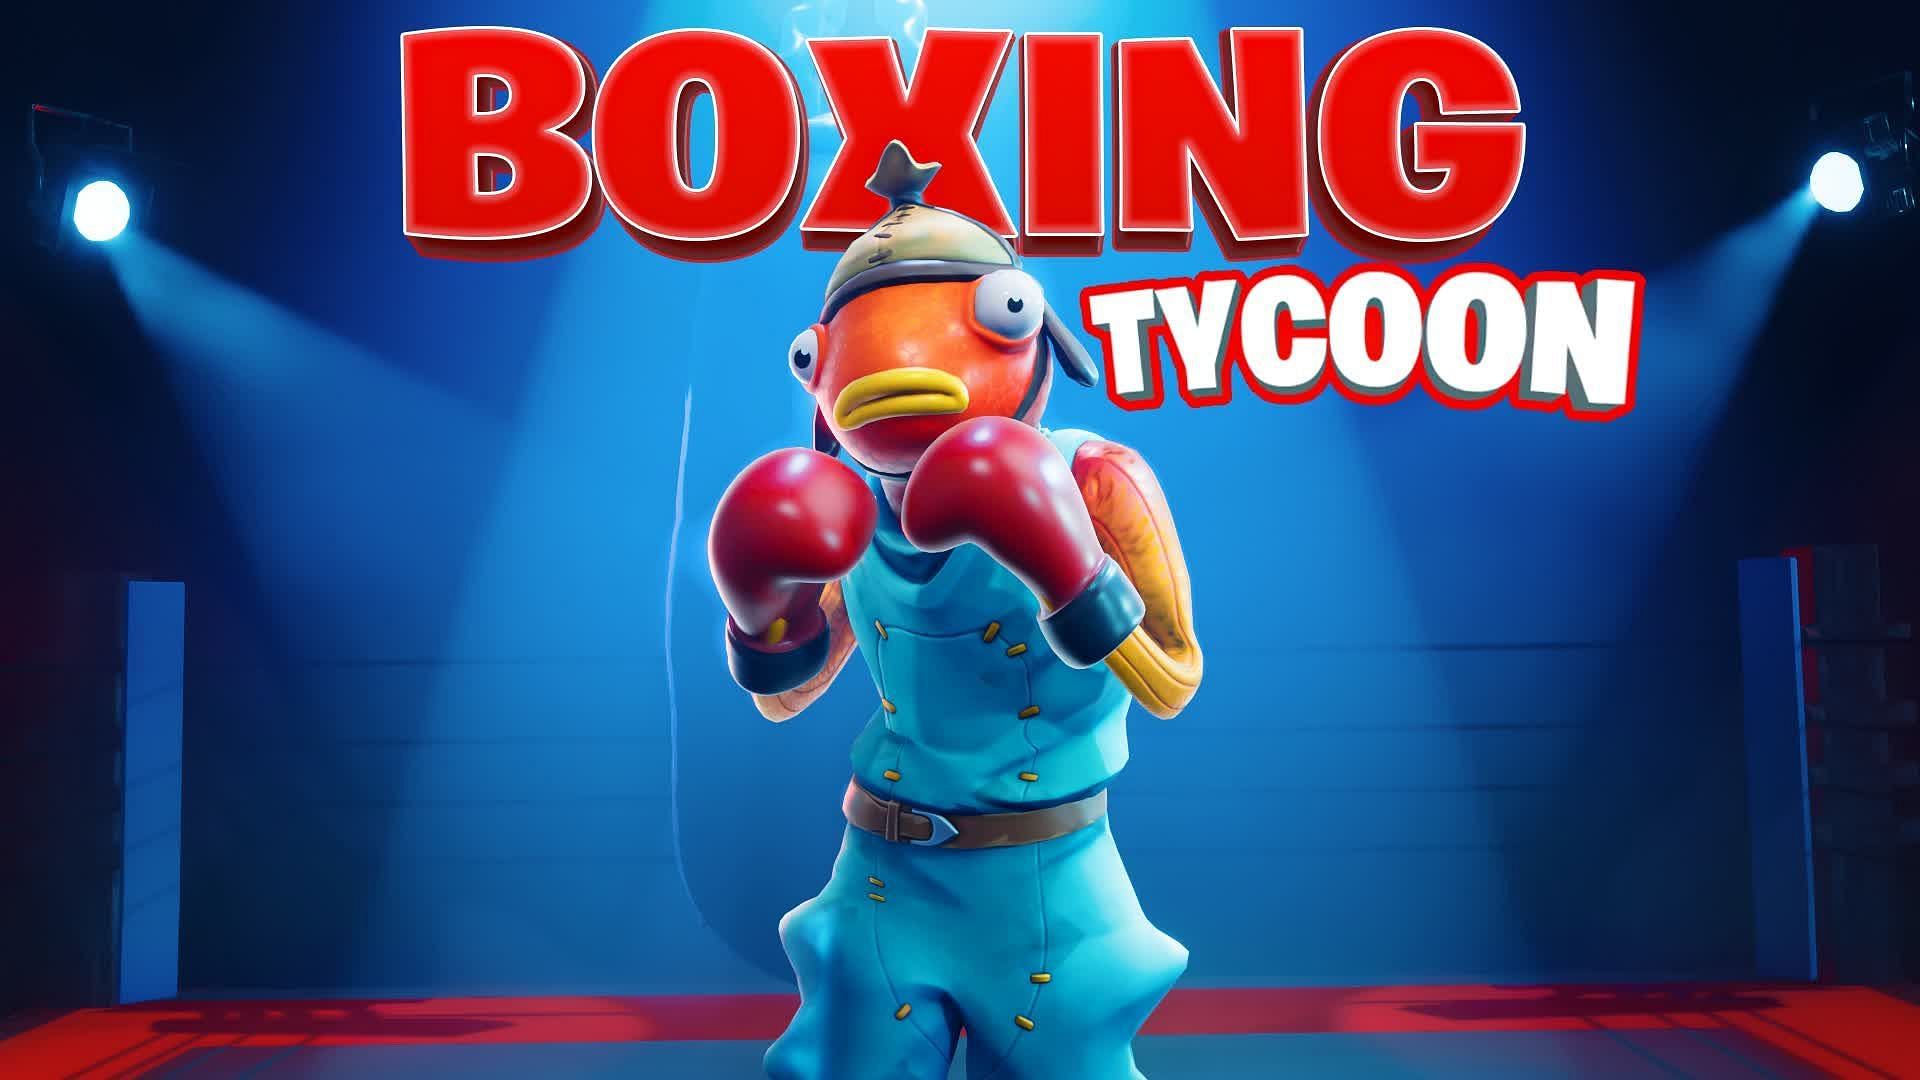 Fortnite Boxing Tycoon: UEFN map code, how to play, and more